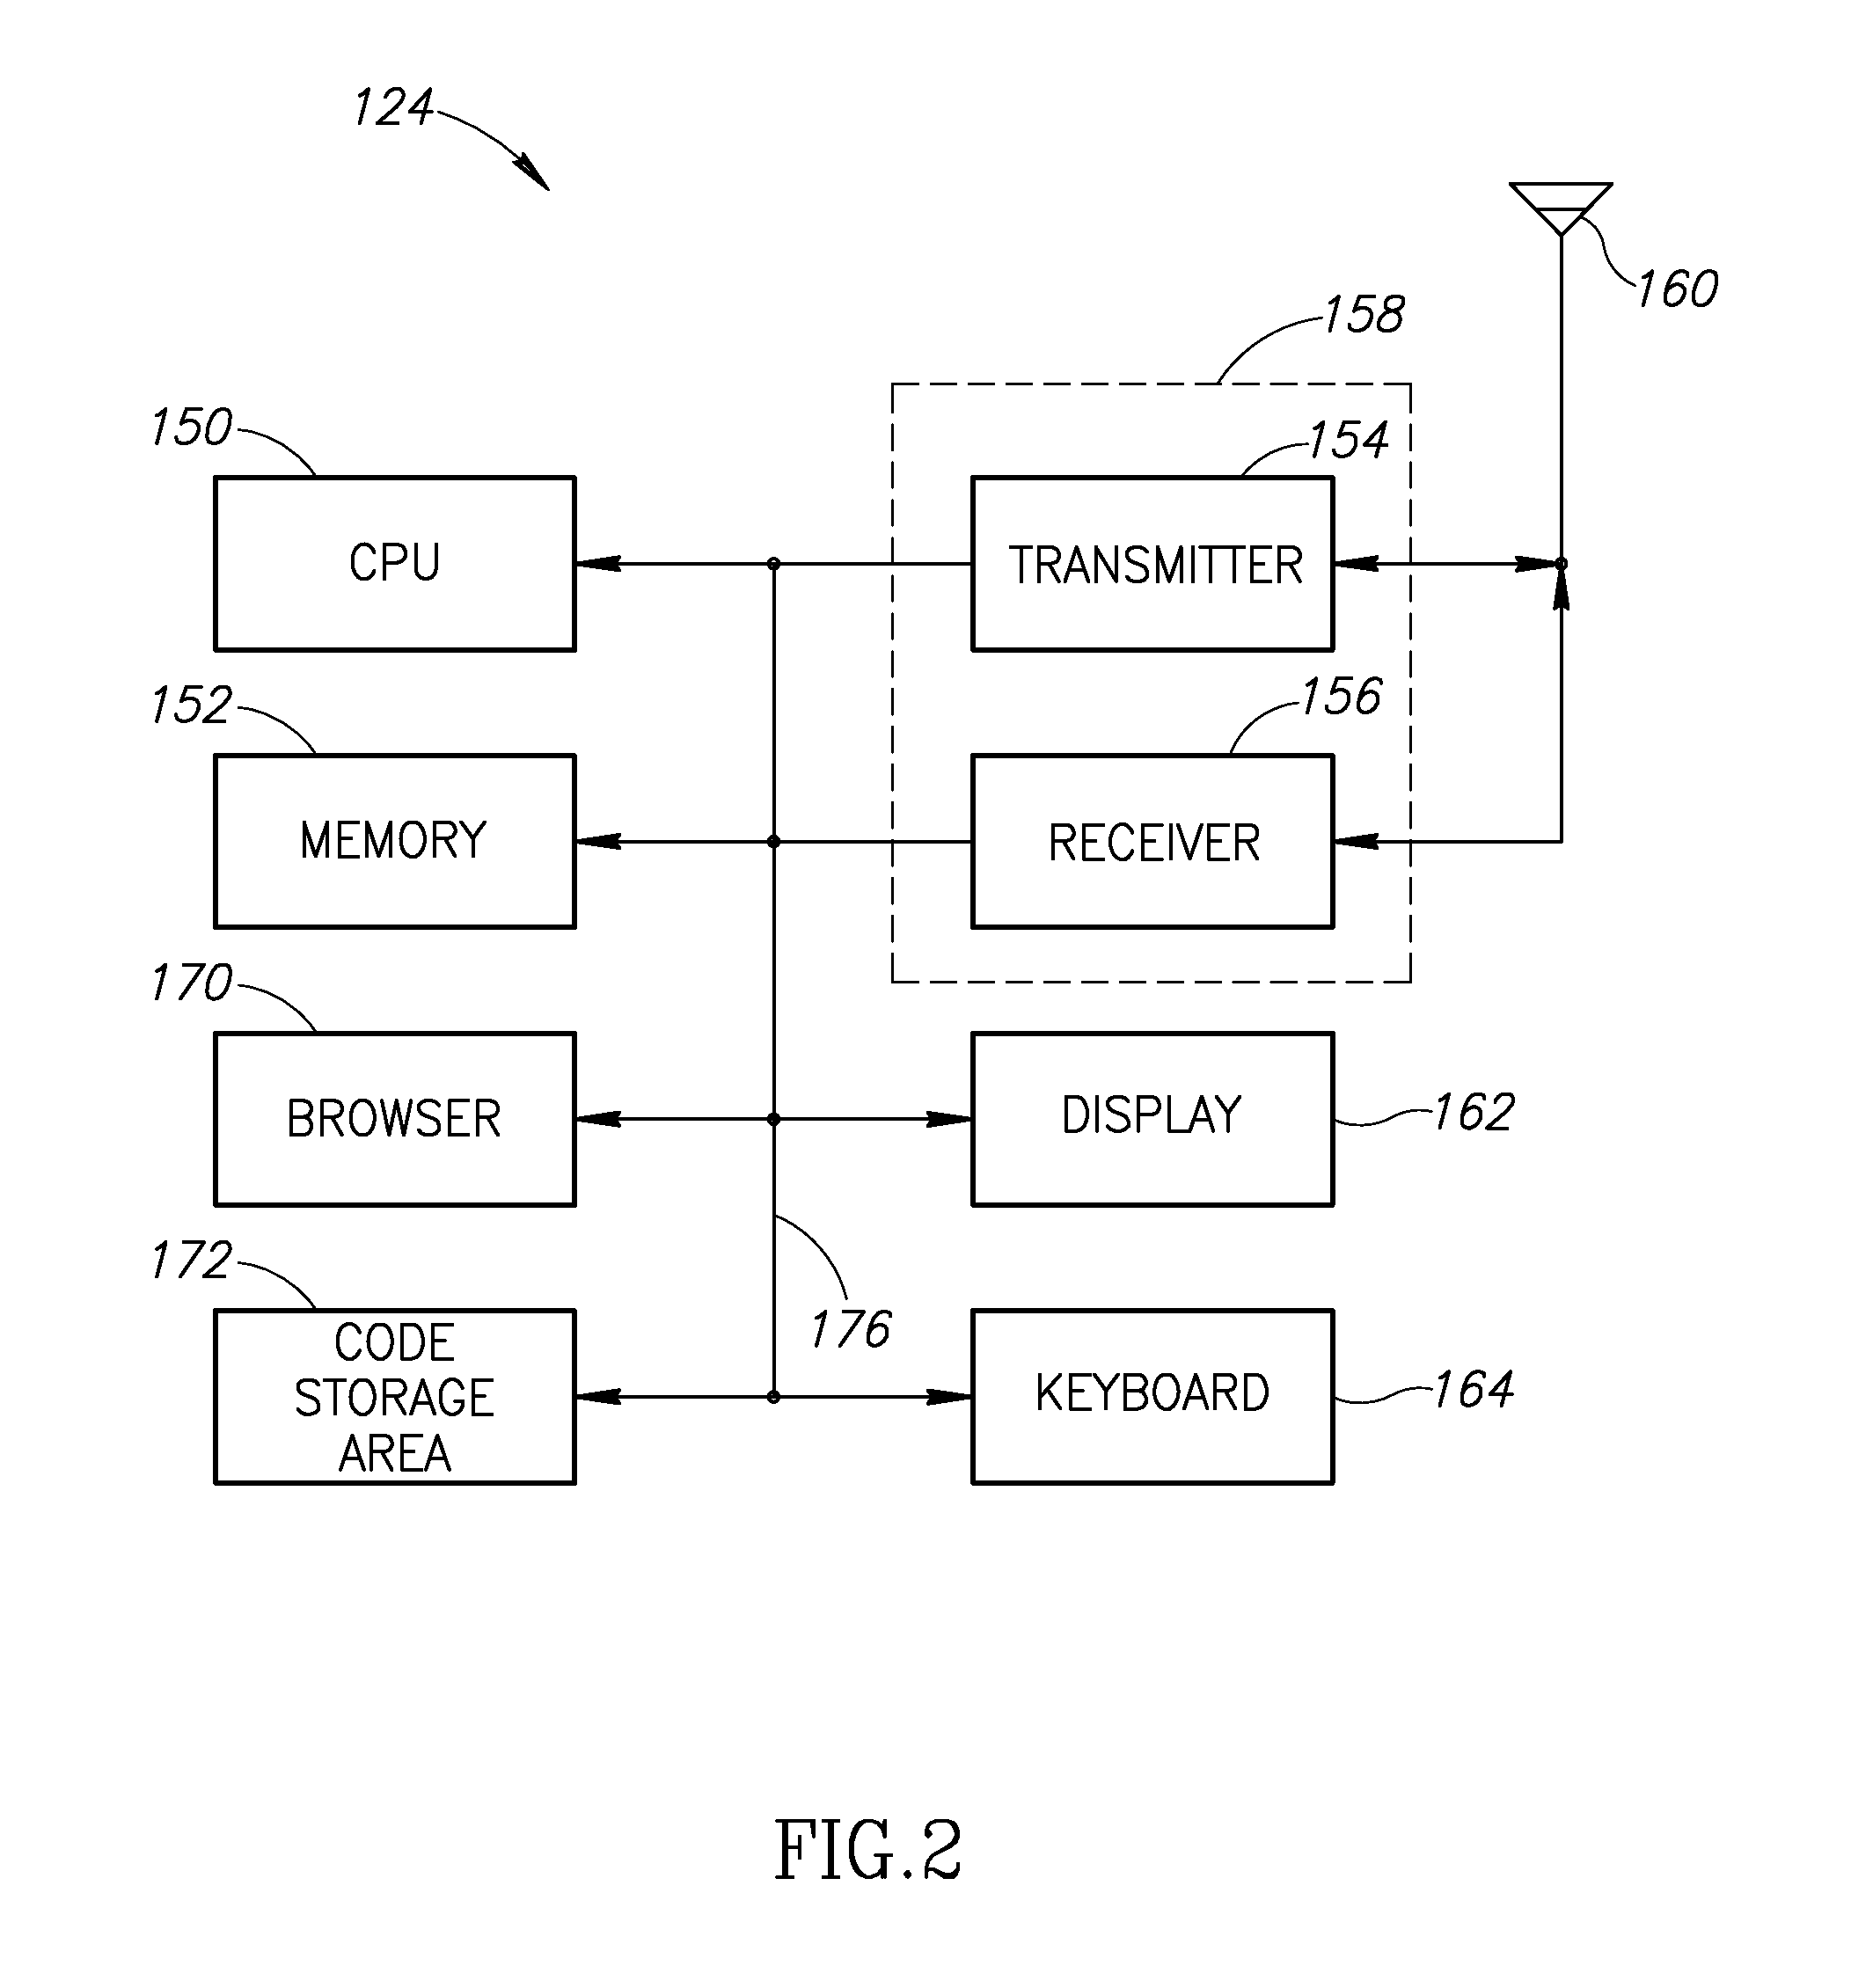 System and method for transaction authentication using a mobile communication device